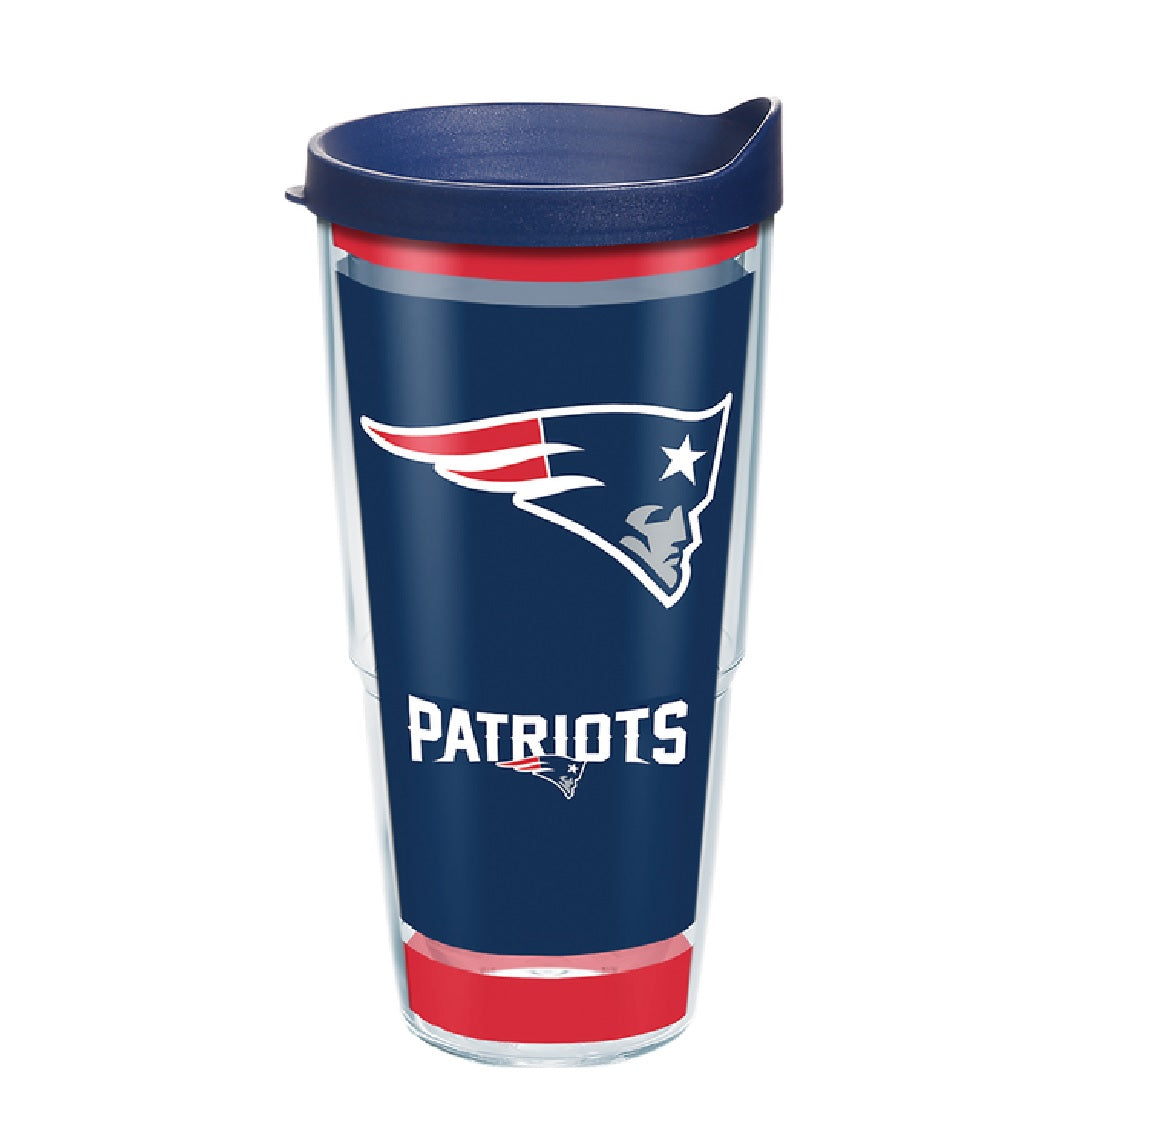 Tervis 1323175 NFL New England Patriots Insulated Tumbler